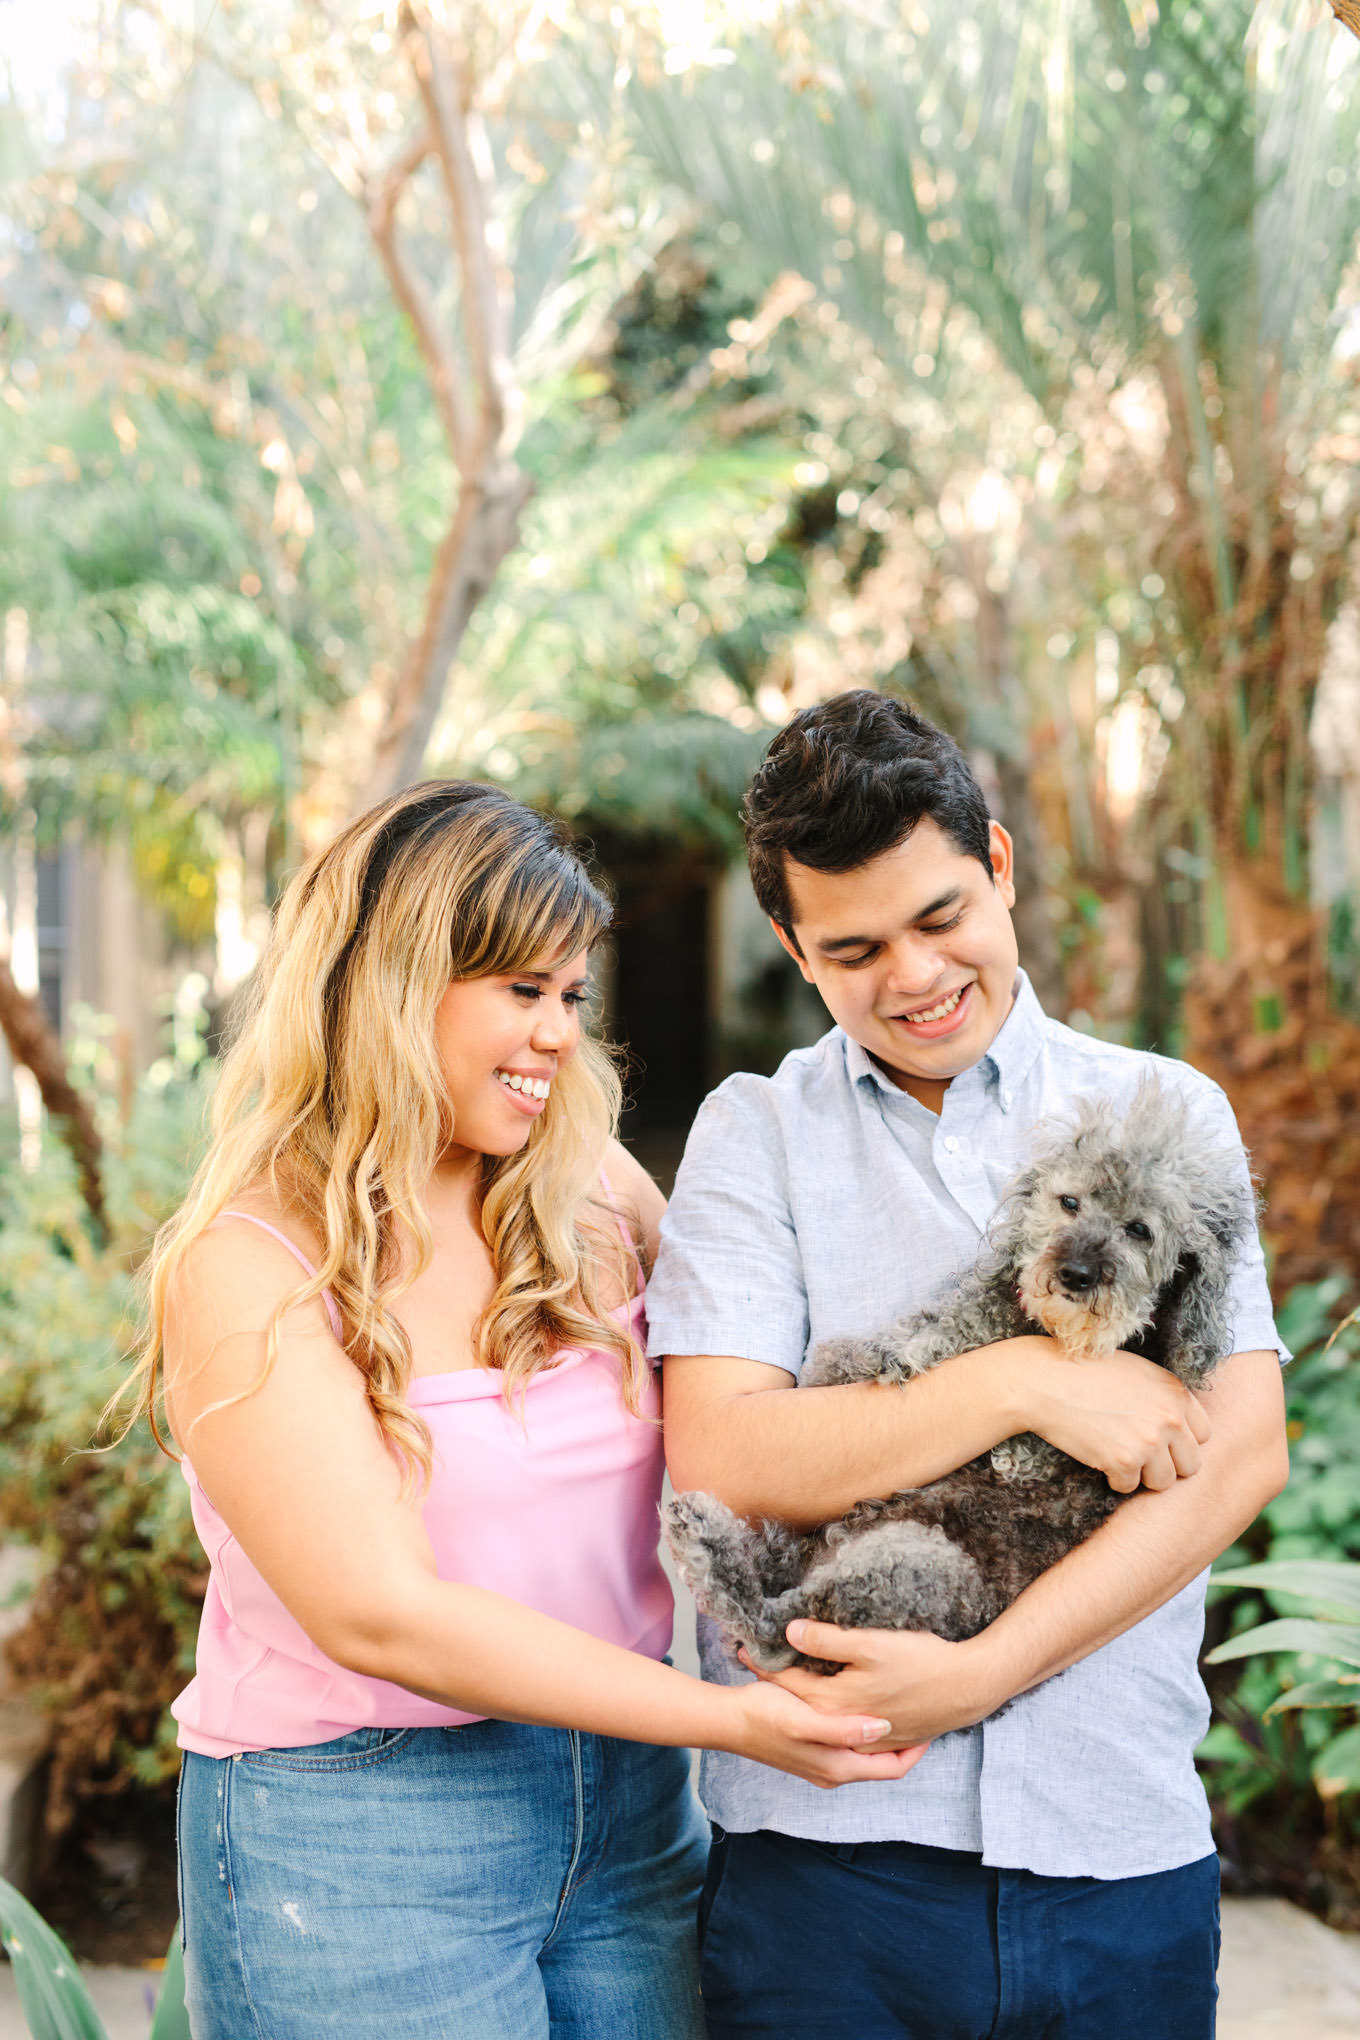 Echo Park engagement session with dog | Engagement, elopement, and wedding photography roundup of Mary Costa’s favorite images from 2020 | Colorful and elevated photography for fun-loving couples in Southern California | #2020wedding #elopement #weddingphoto #weddingphotography #microwedding   Source: Mary Costa Photography | Los Angeles